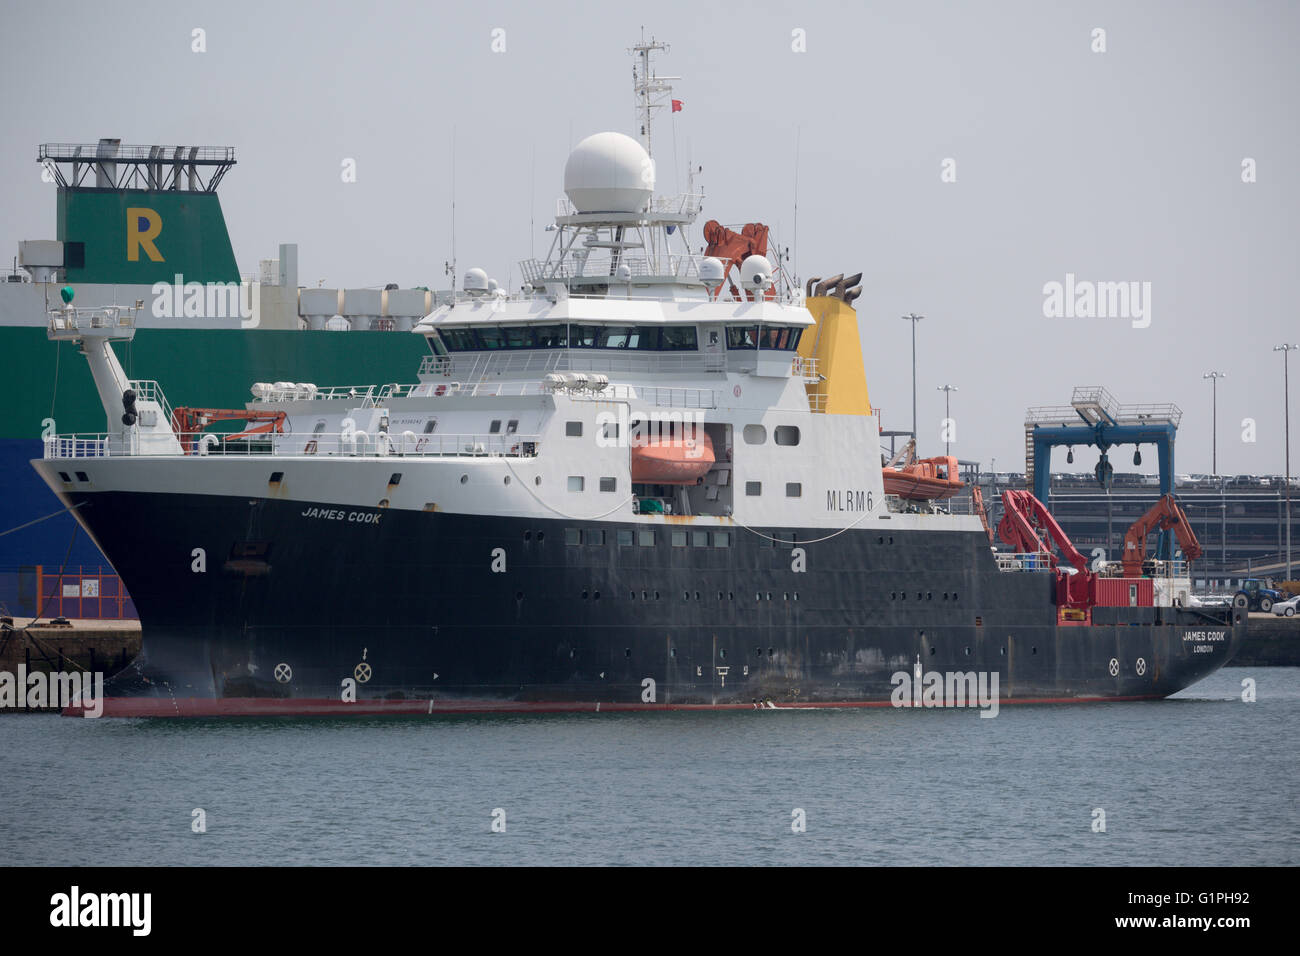 Southampton, United Kingdom - May 14th 2016. The UK's research ship RSS James Cook docked in Southampton docks. Stock Photo